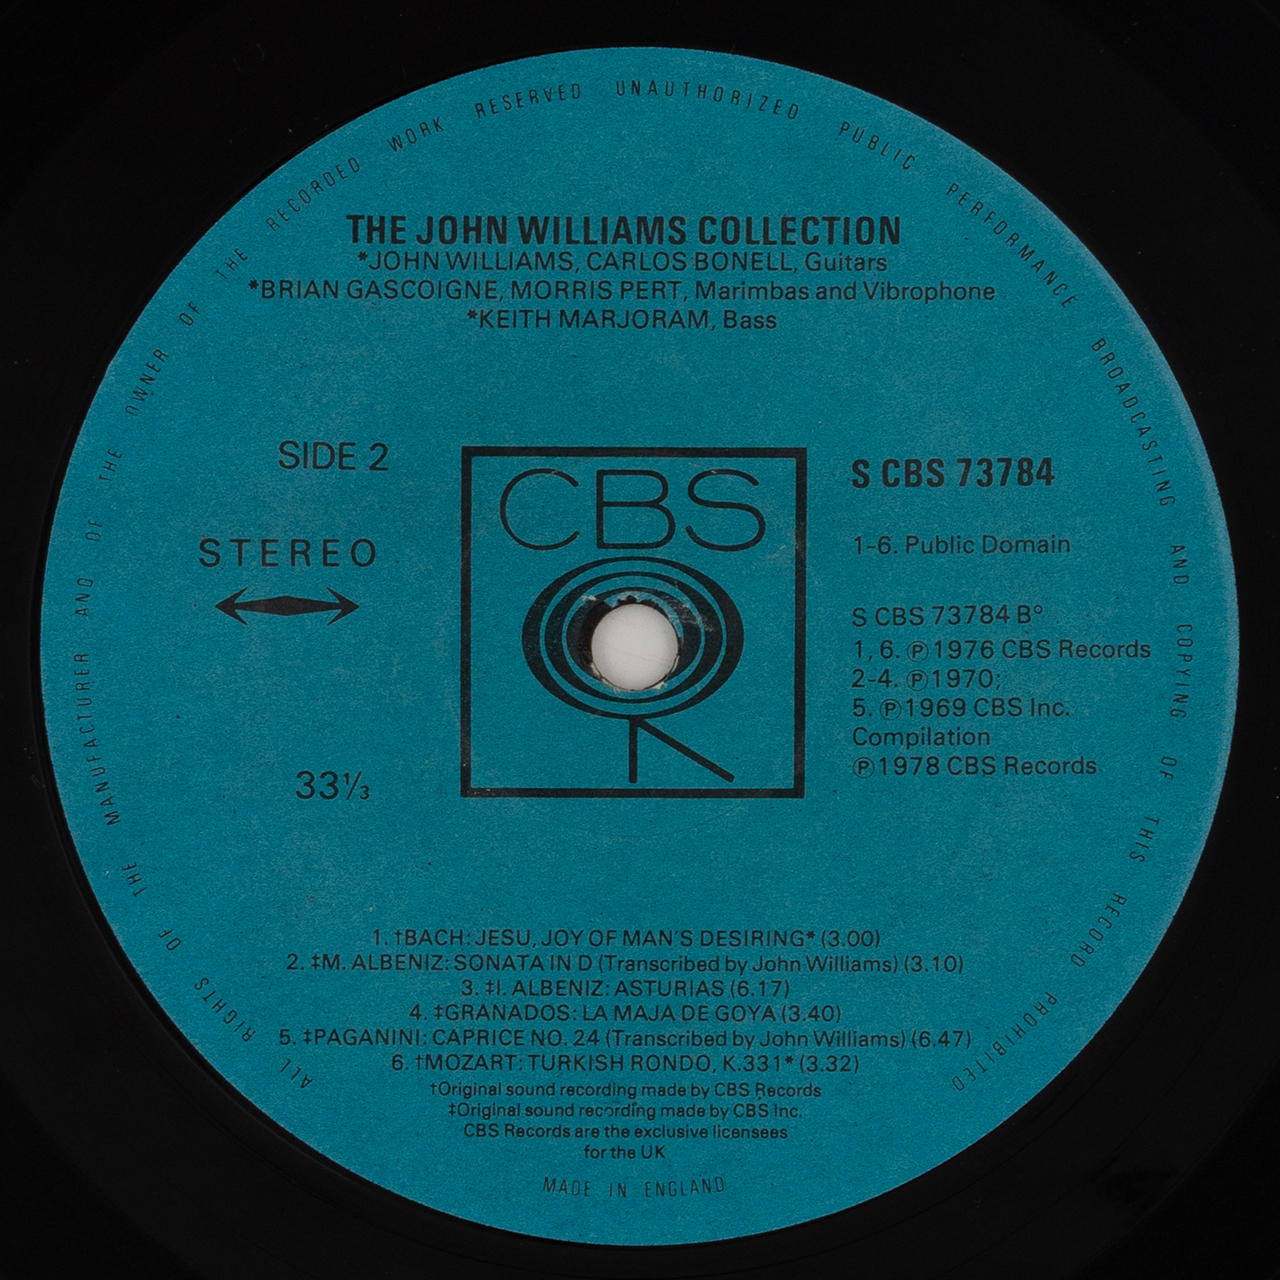 The John Williams Collection